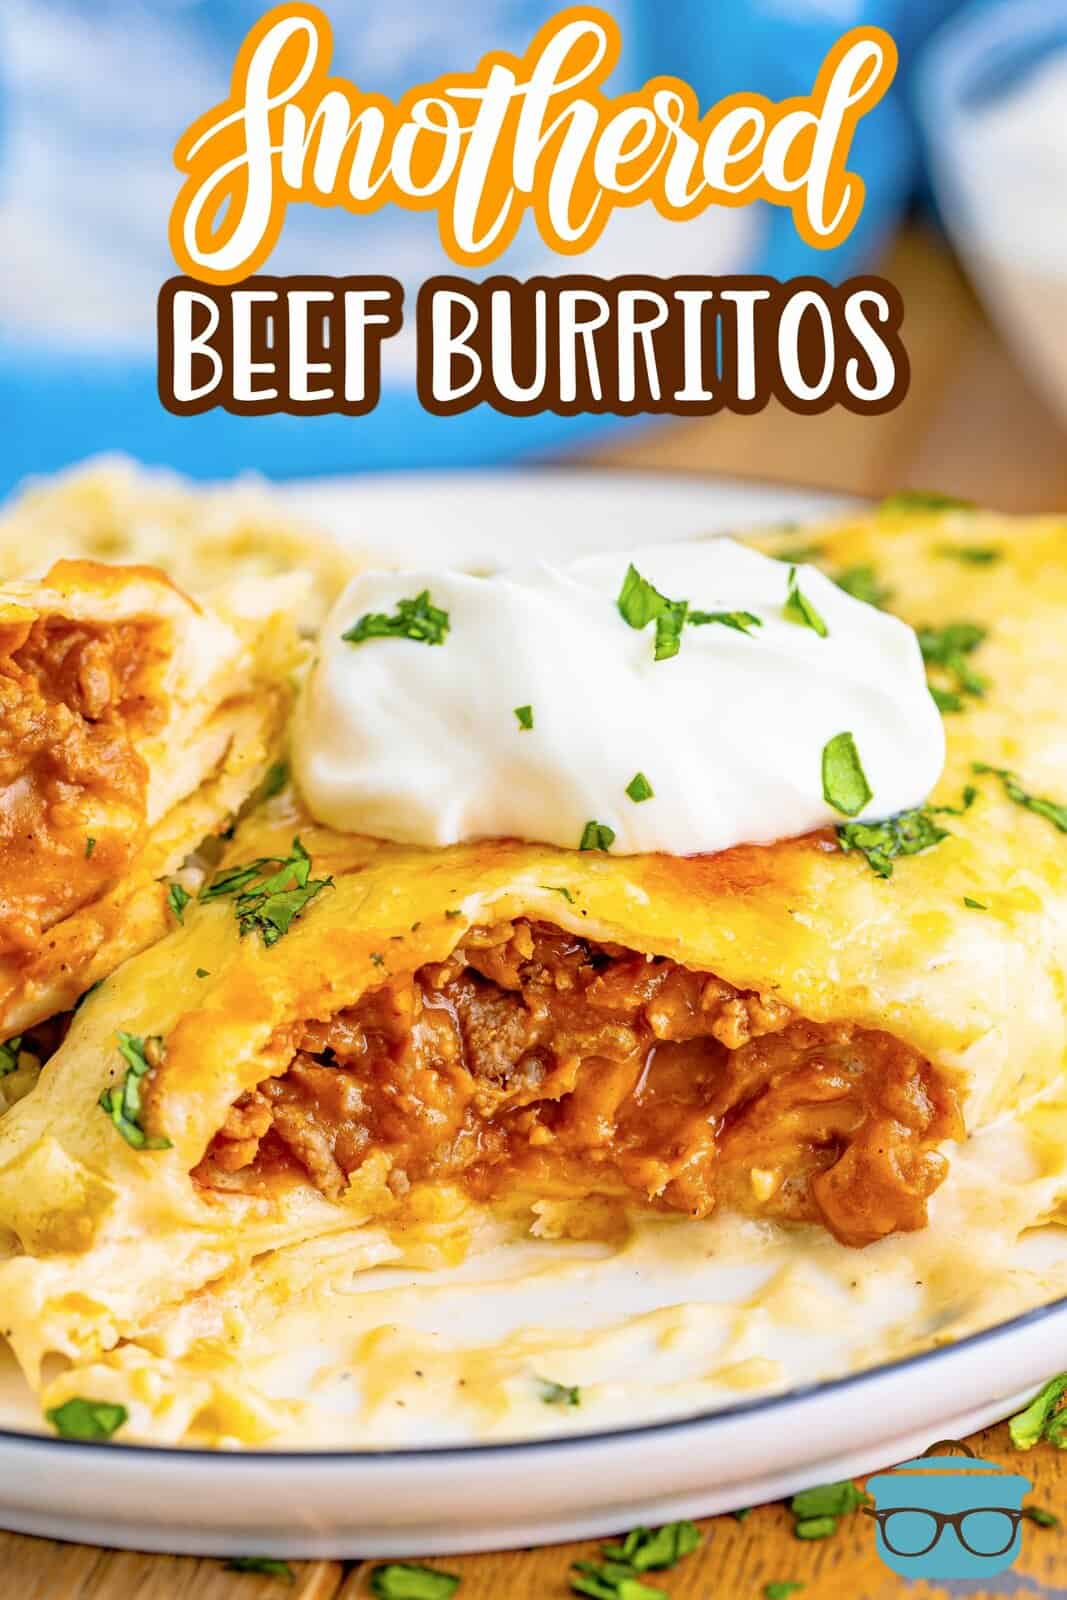 Pinterest image of one of the Smothered Beef Burritos on white plate with bite taken out of it showing filling.